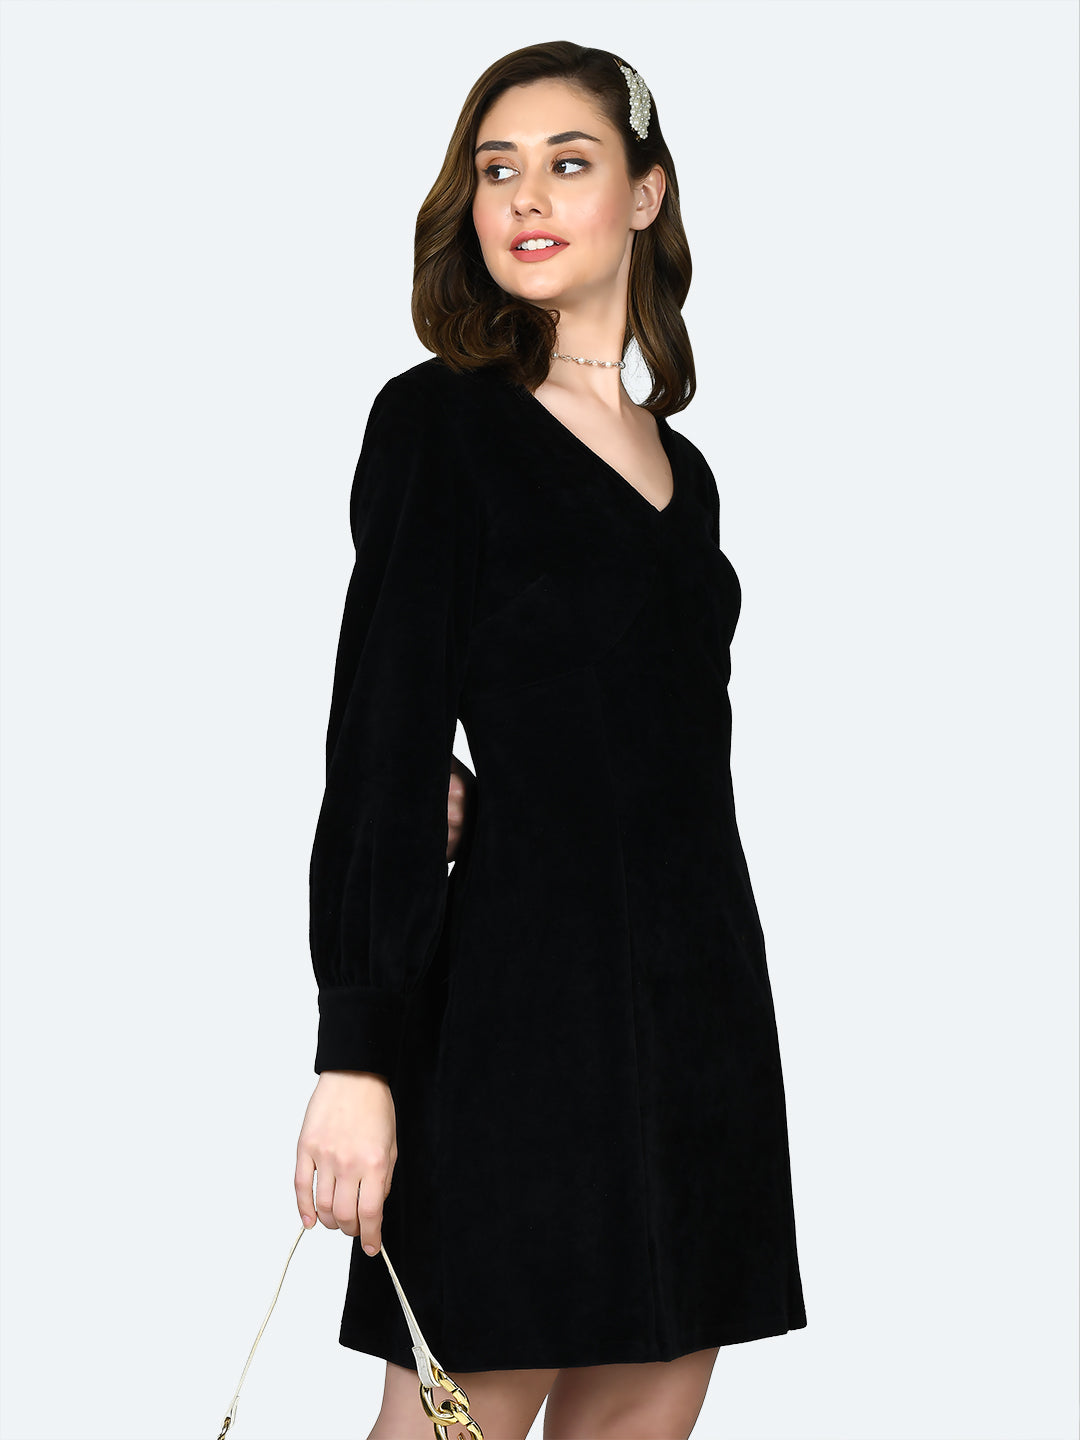 Black Solid Fitted Short Dress For Women